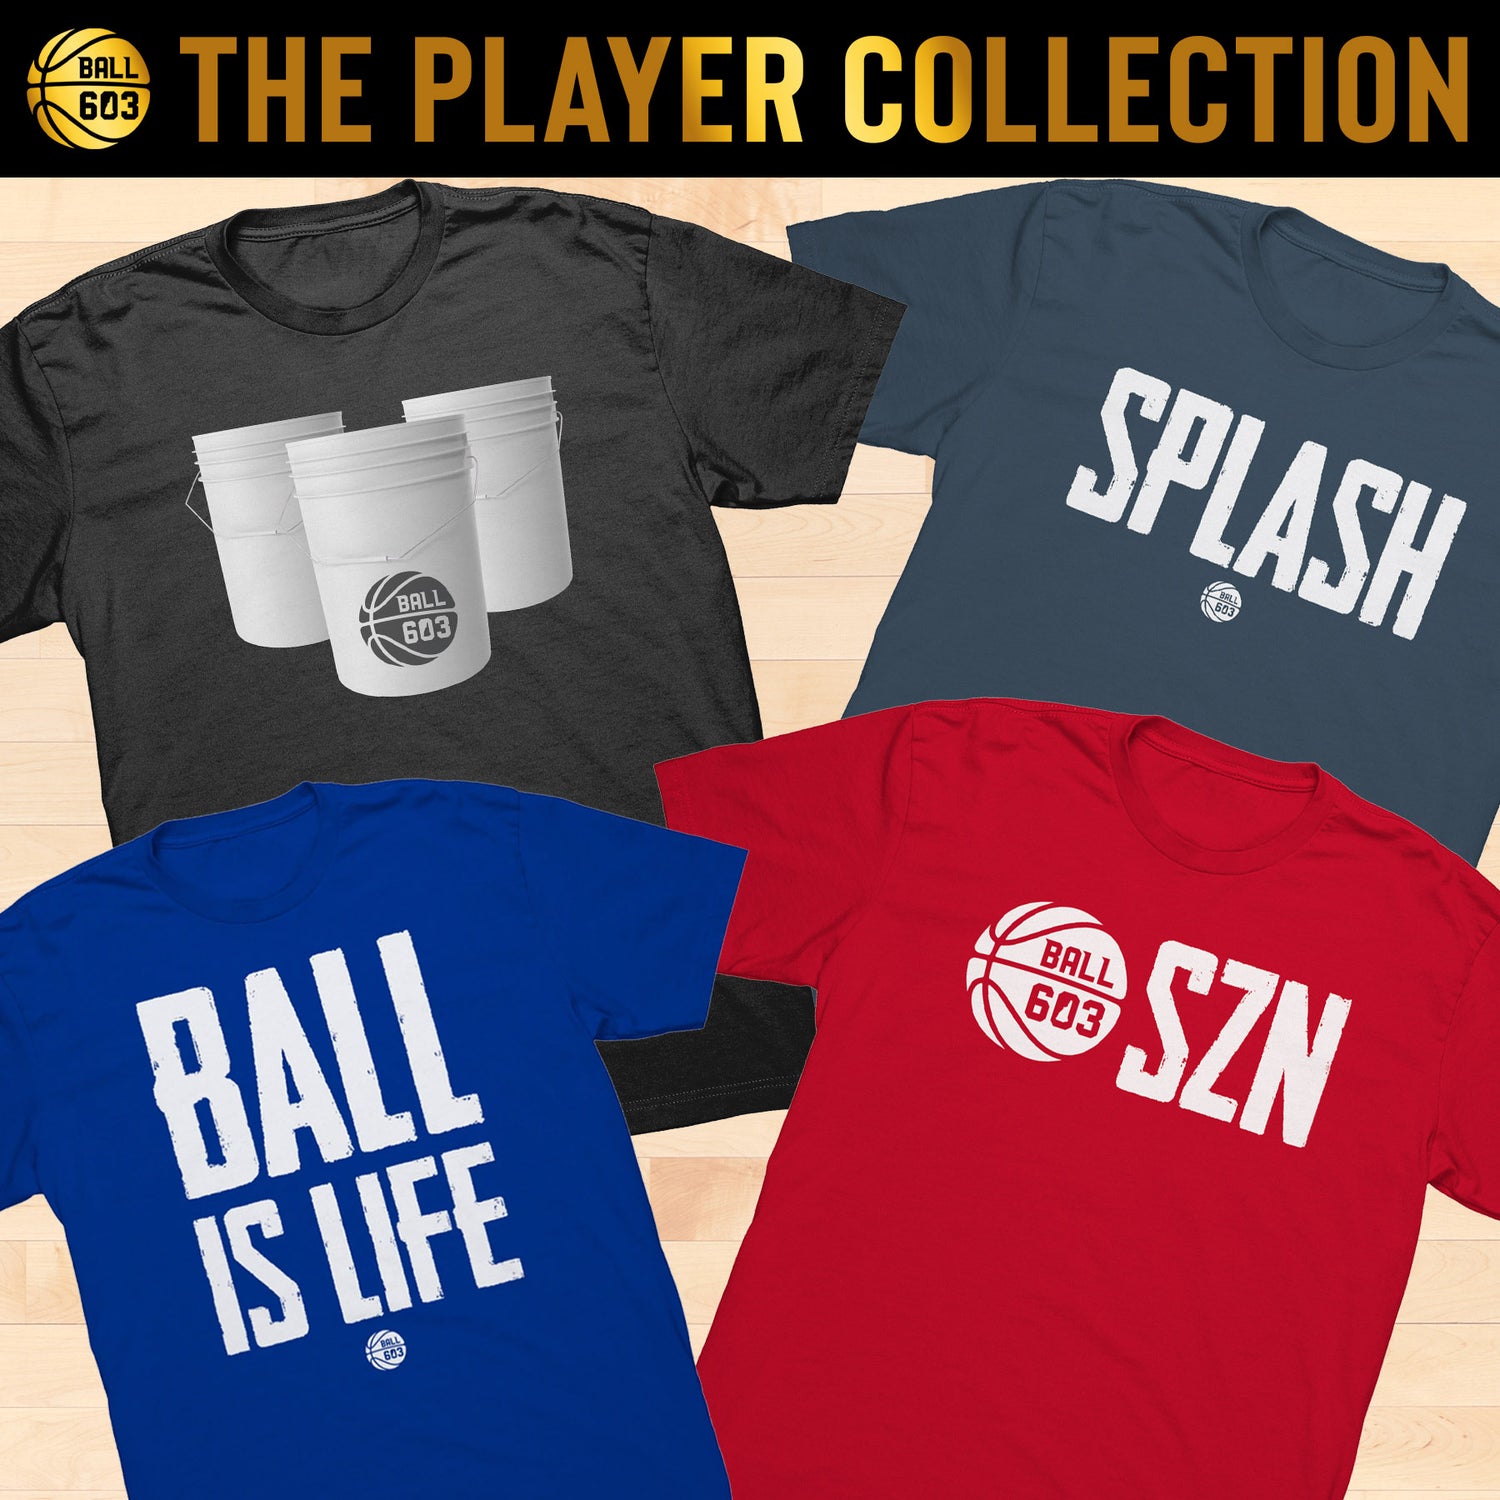 The Player Collection